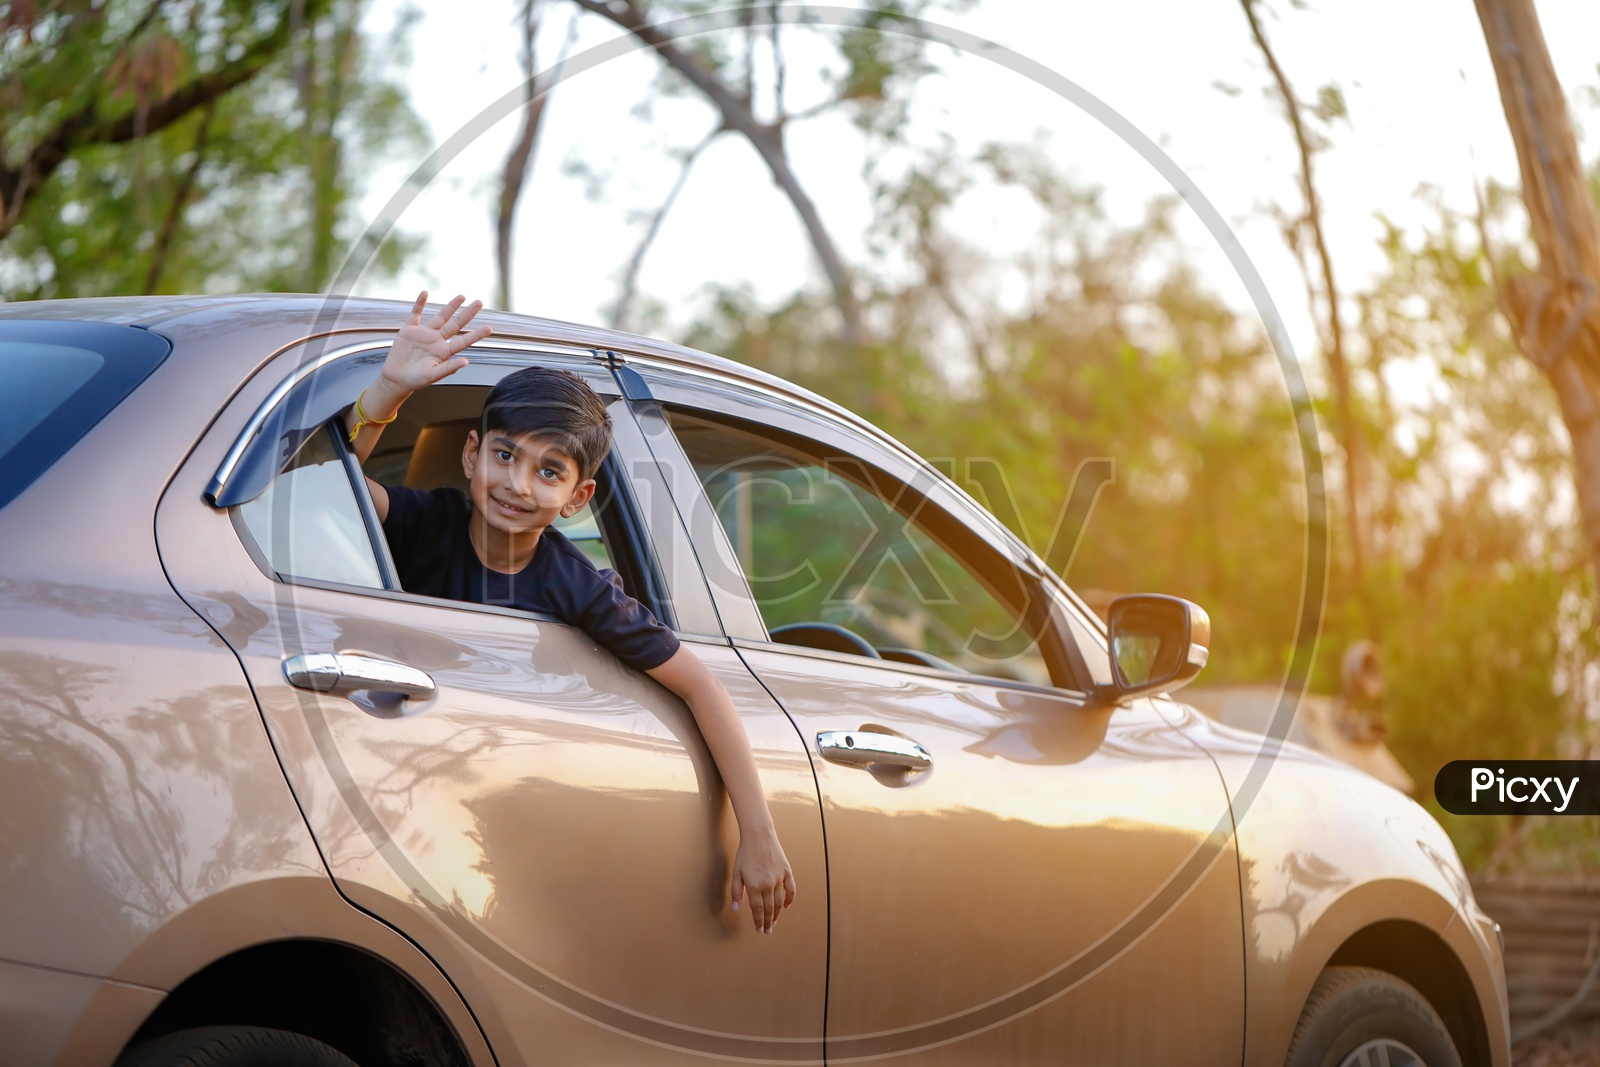 Indian Young Boy Or Kid Or Child Playing And  Posing Inside a  Car